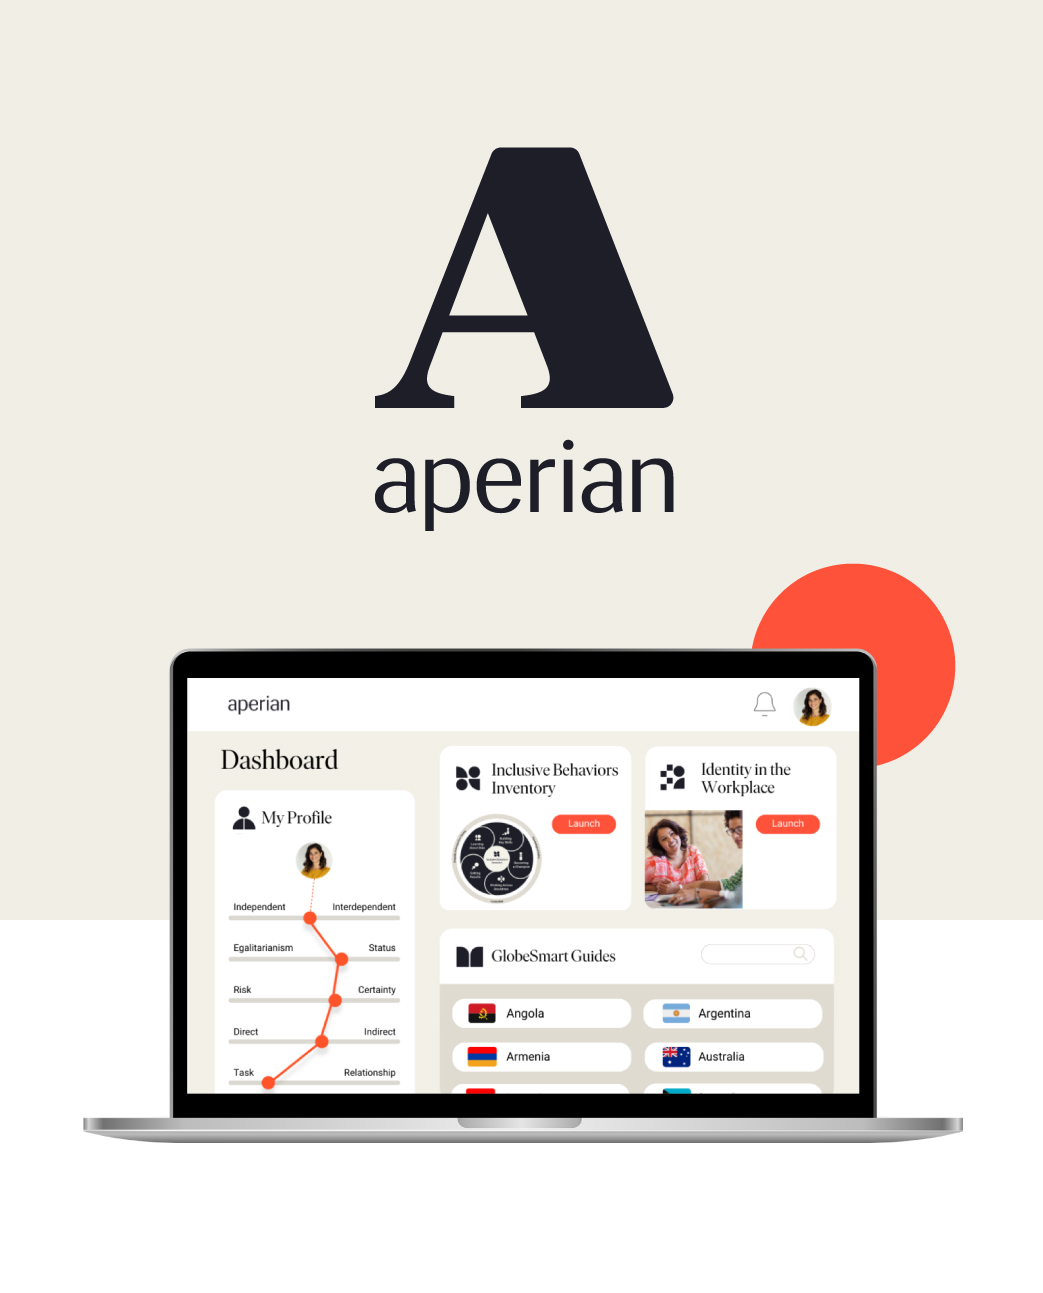 Aperian logo and software product view in a laptop